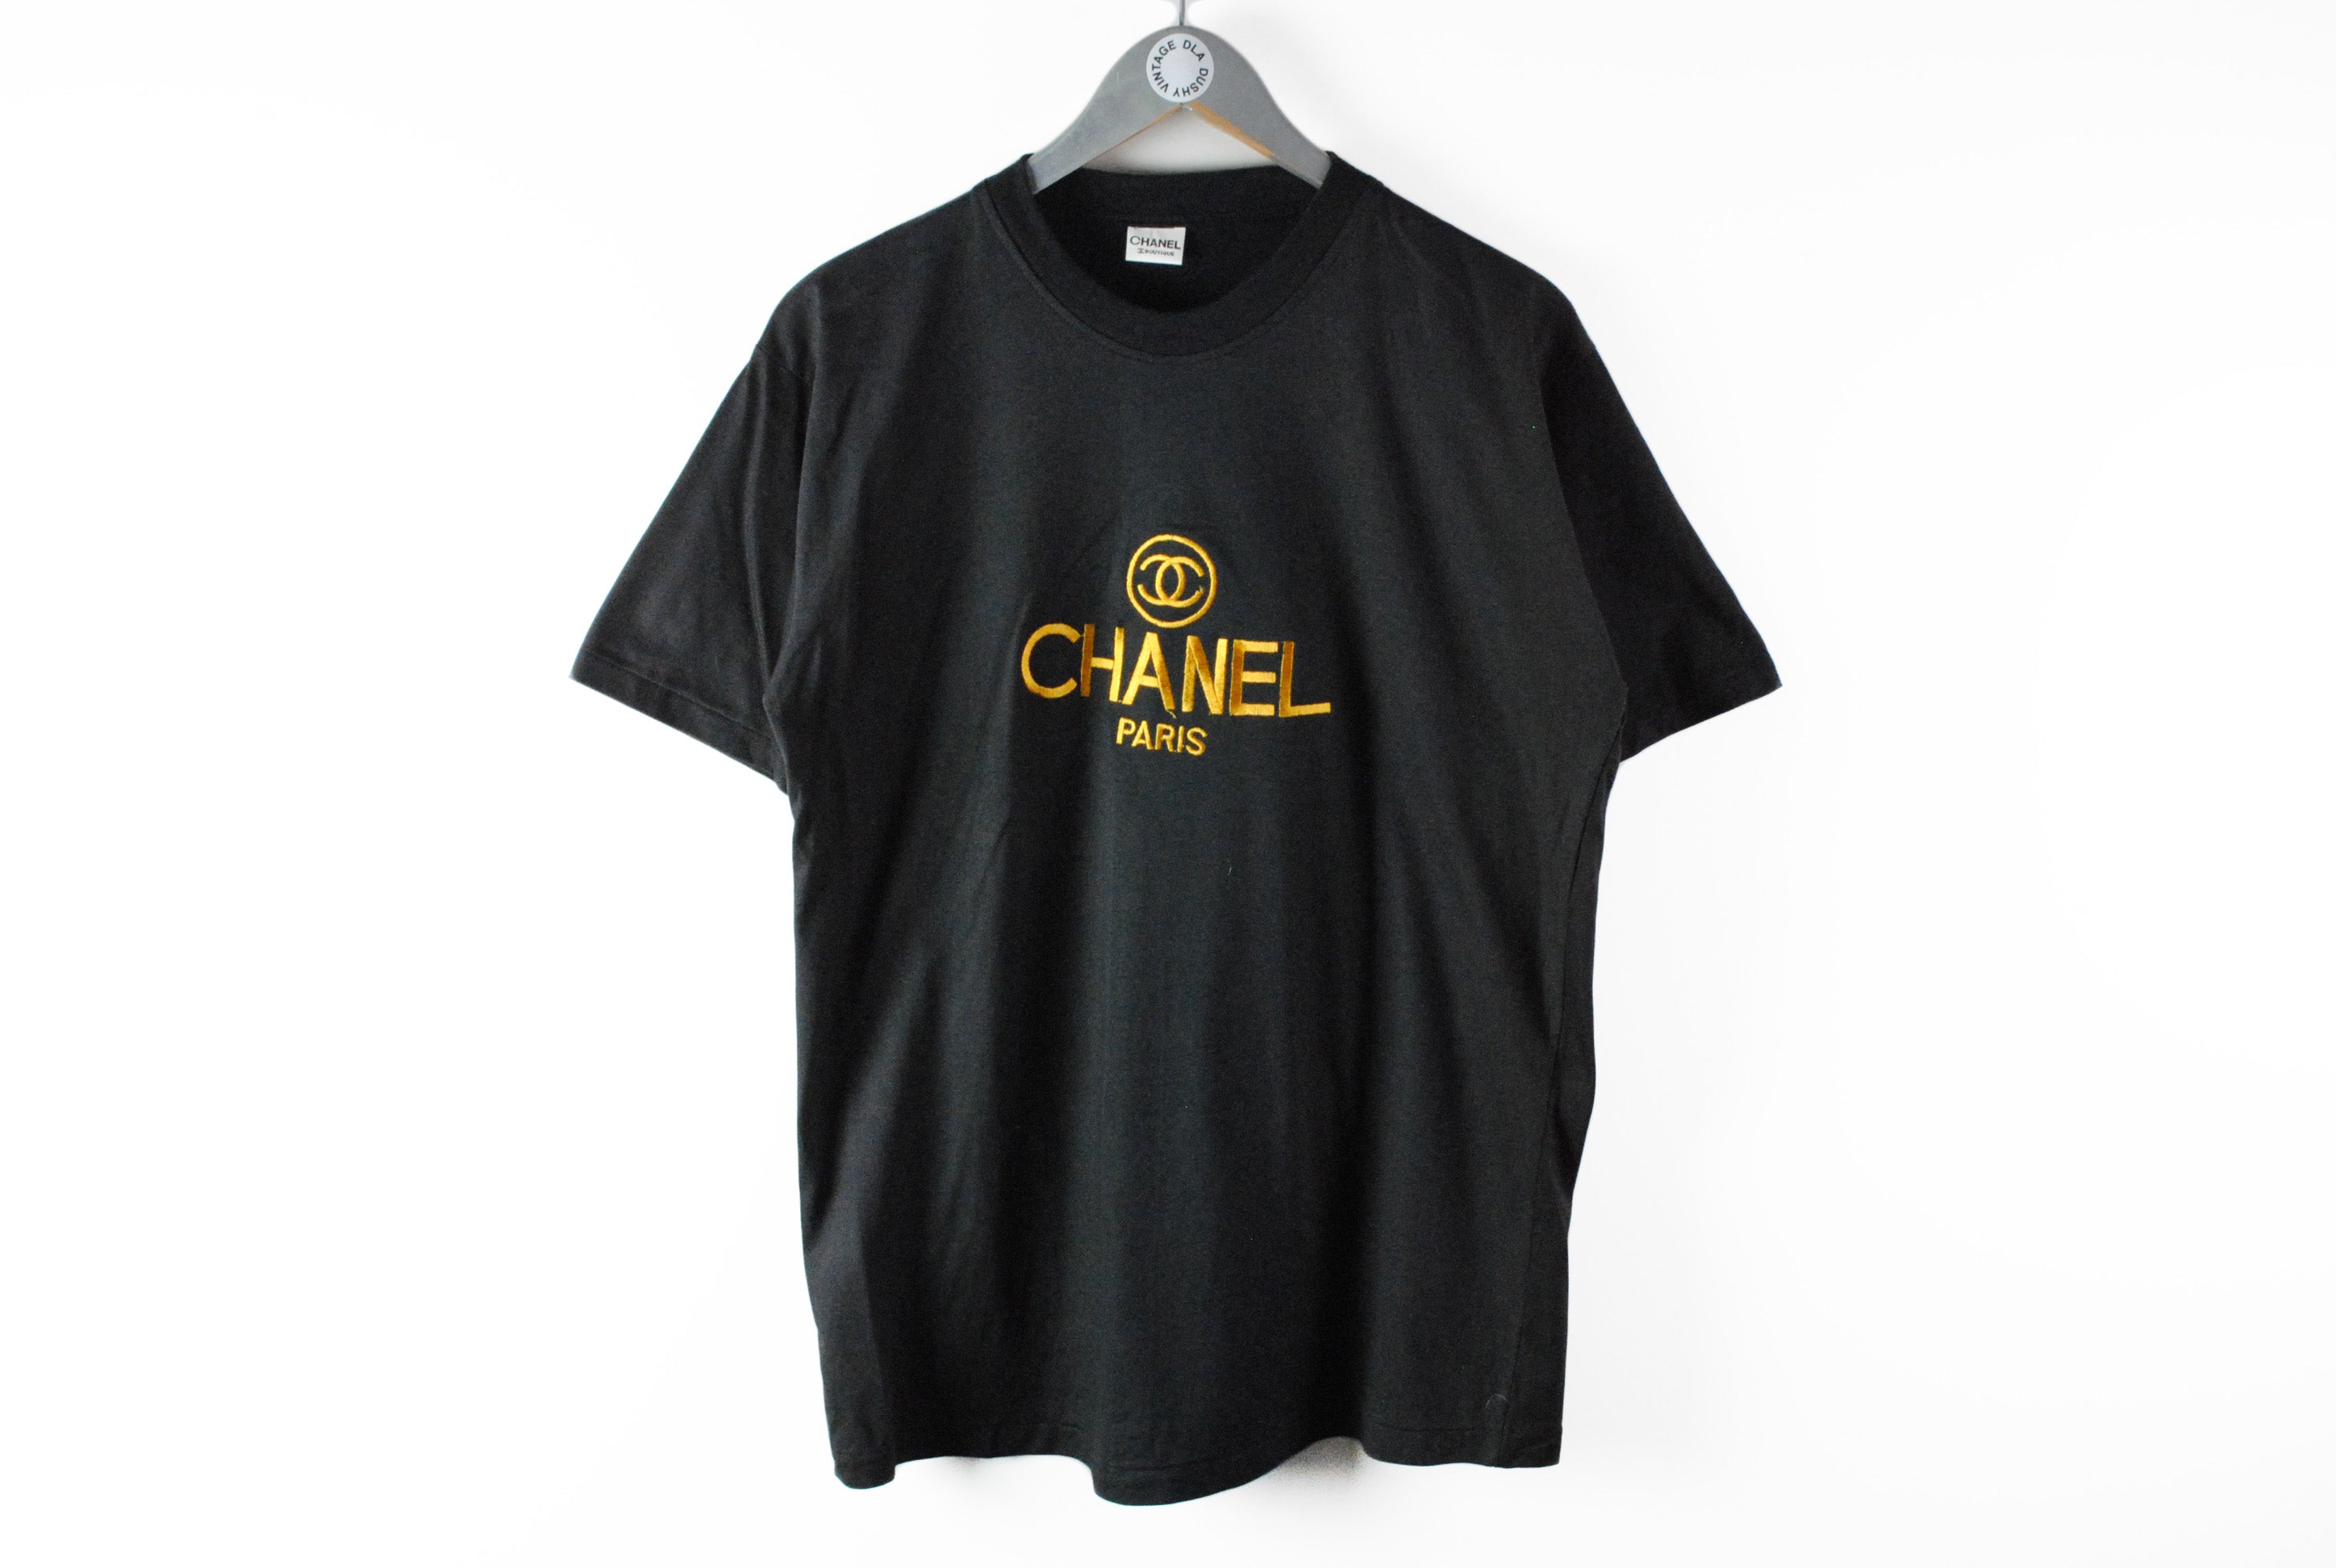 Chanel Logo Butterfly Shirt - Vintagenclassic Tee